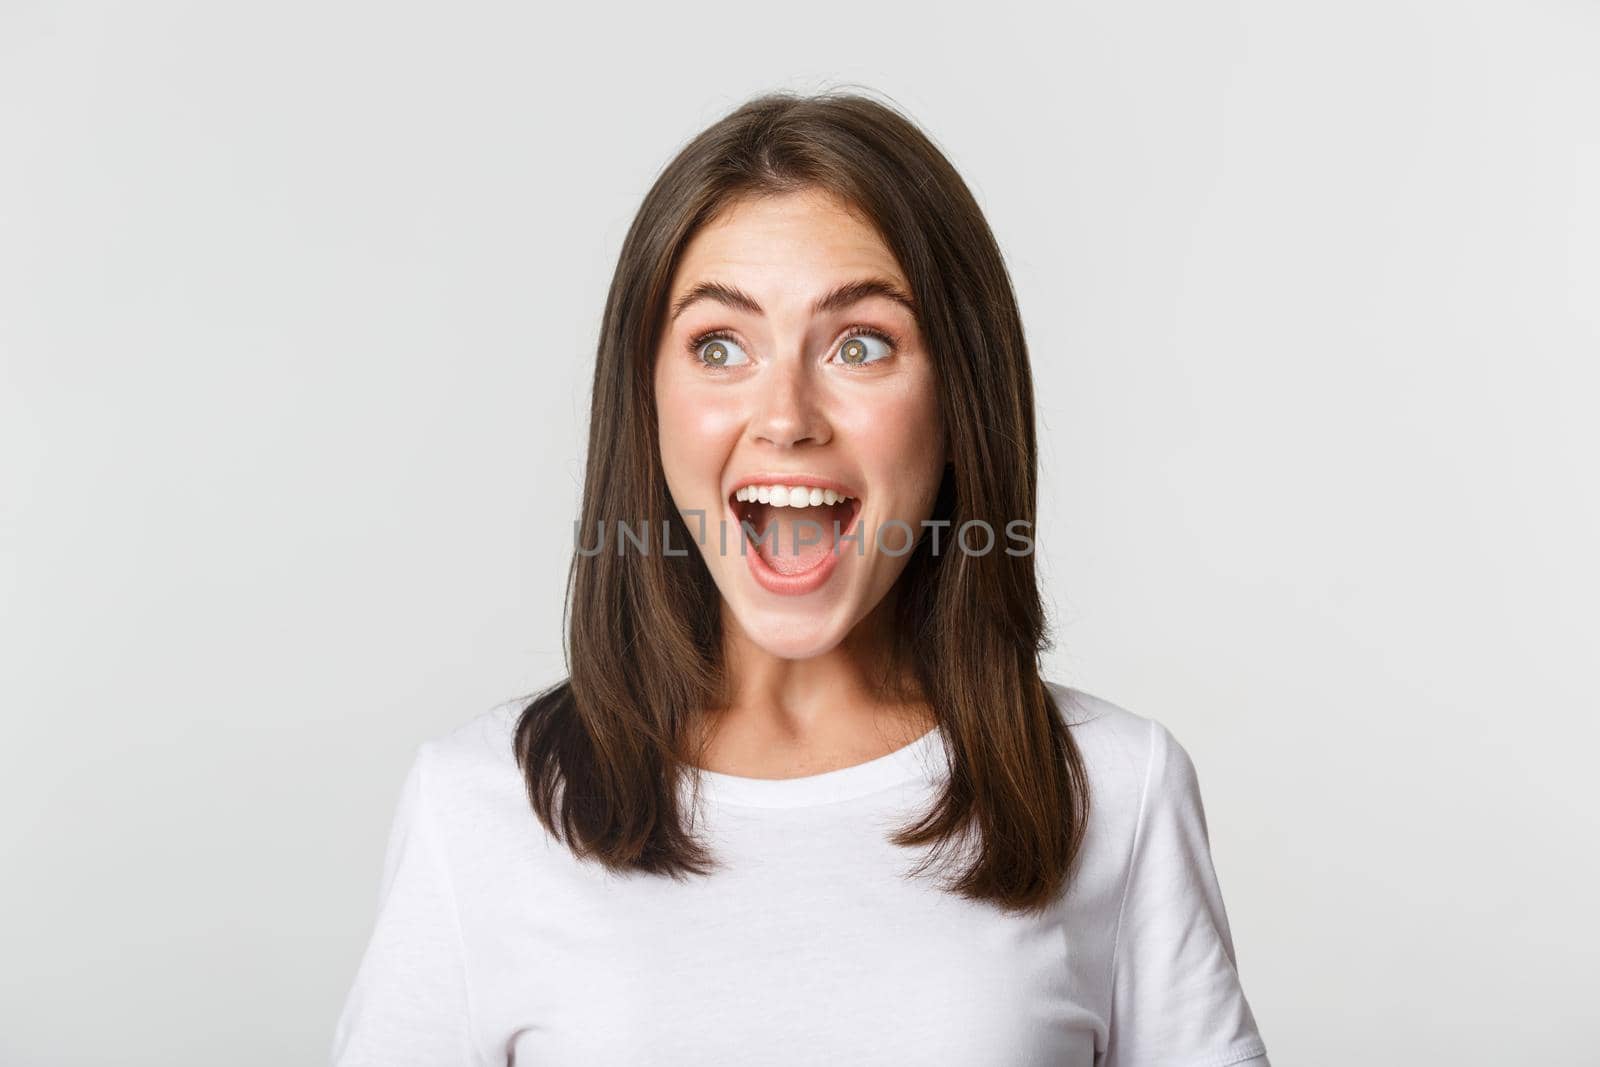 Portrait of joyful pretty brunette girl looking left amused, smiling excited and surprised over white background.